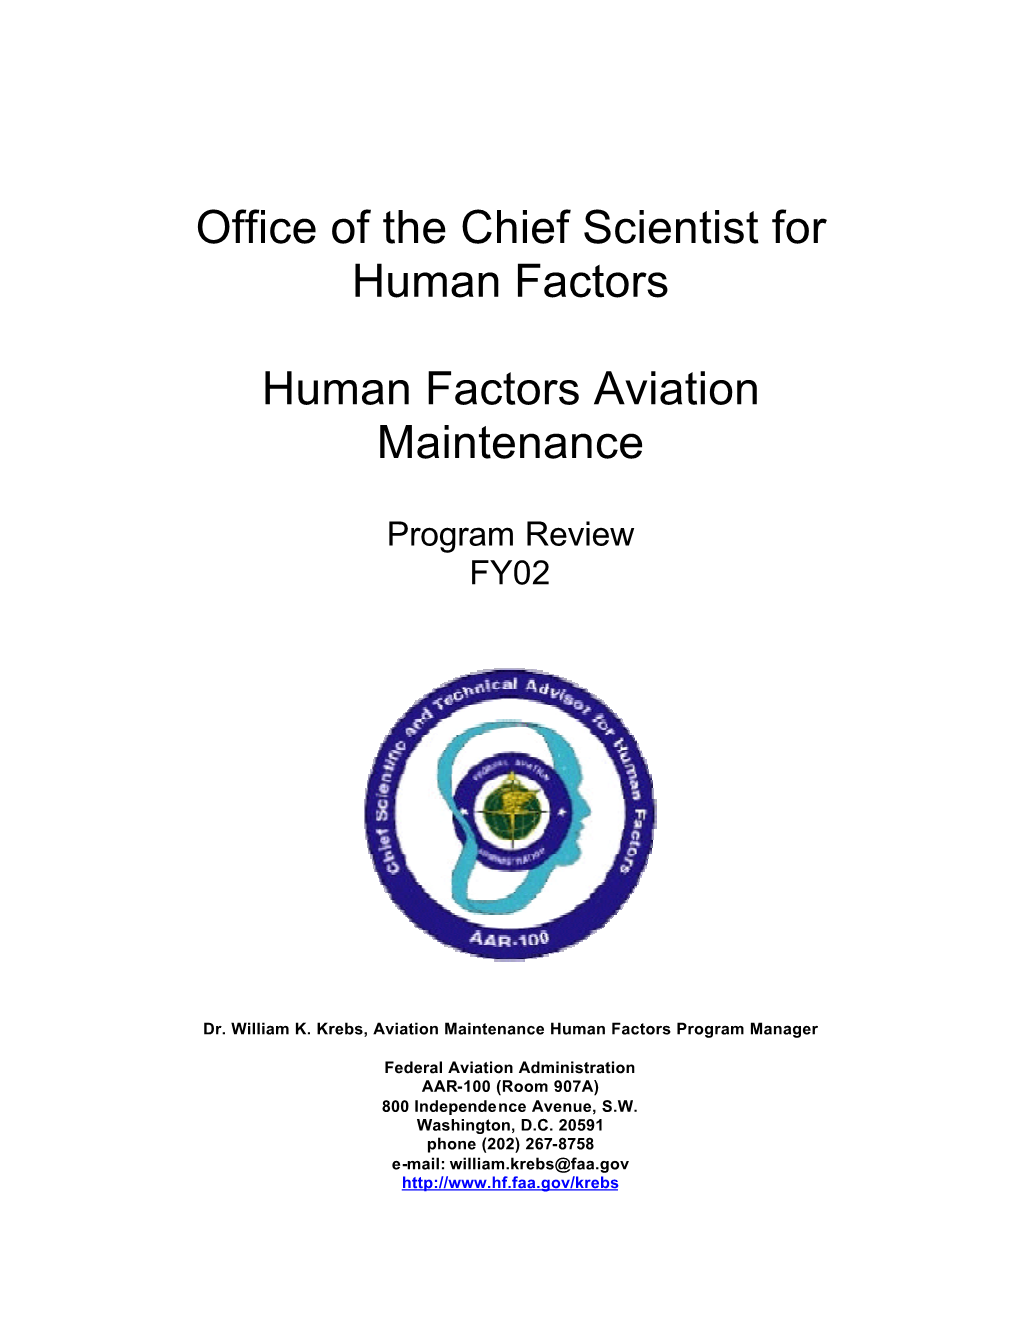 Office of the Chief Scientist for Human Factors Human Factors Aviation